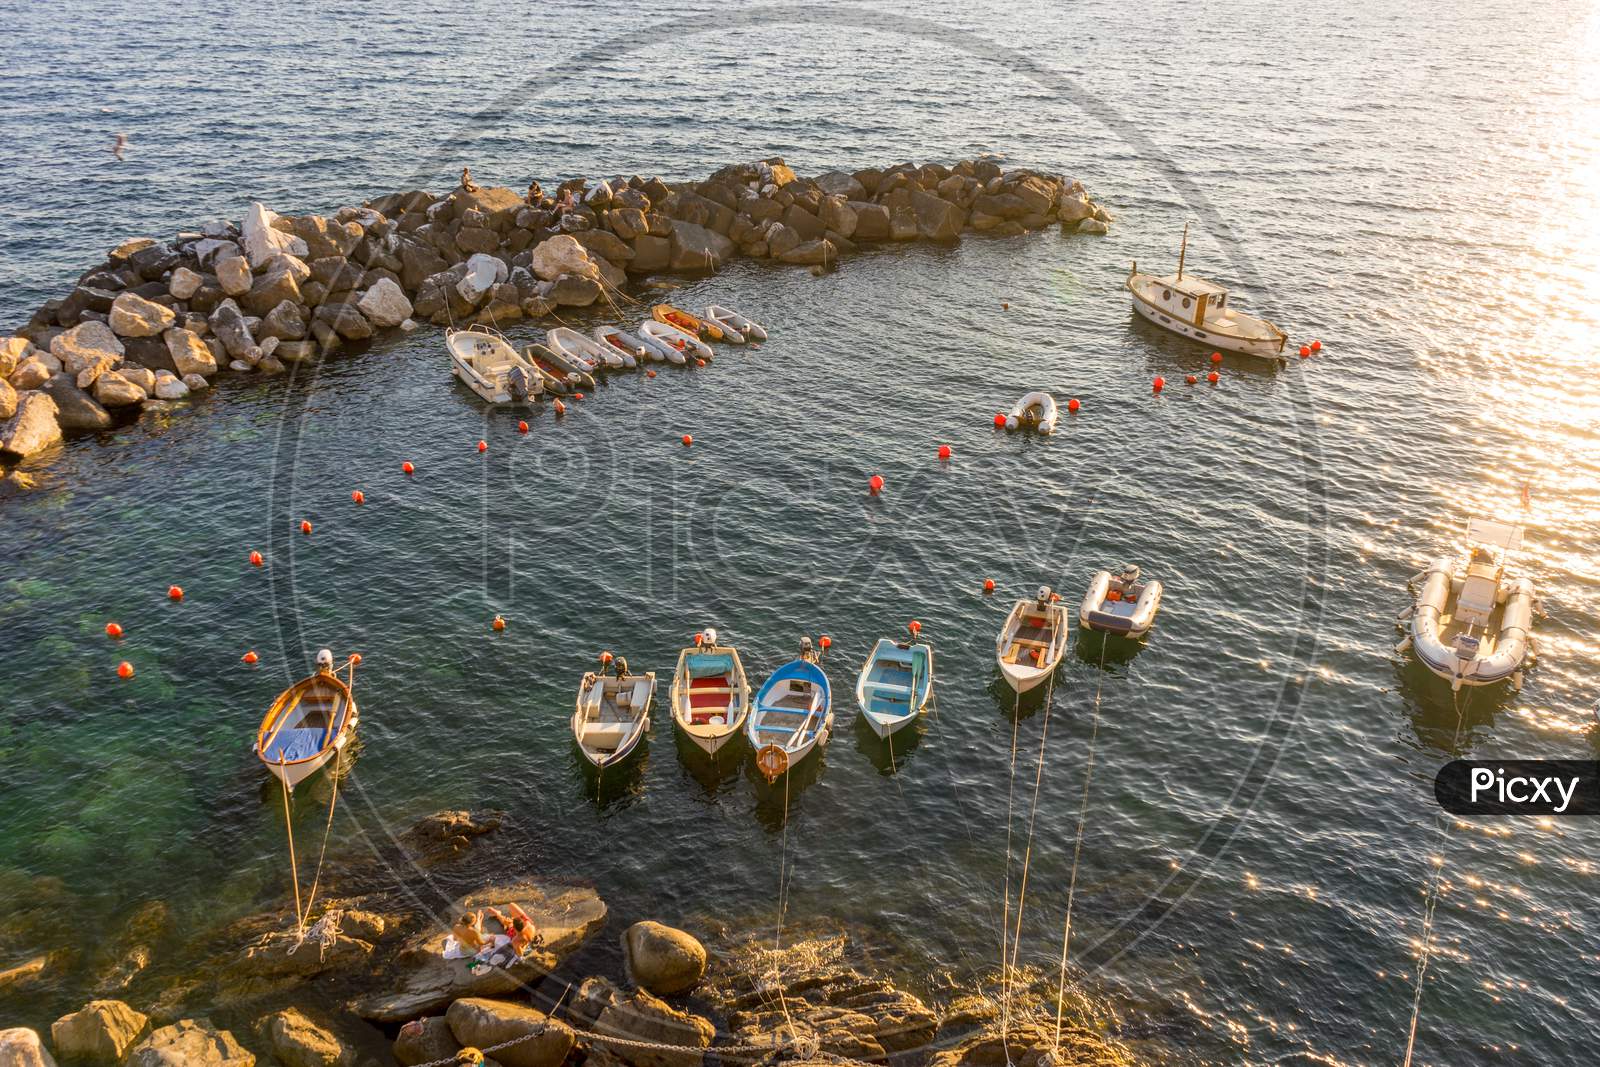 Boats And Yachts On The Ocean During Sunset, Italian Riviera Of Riomaggiore, Cinque Terre, Italy